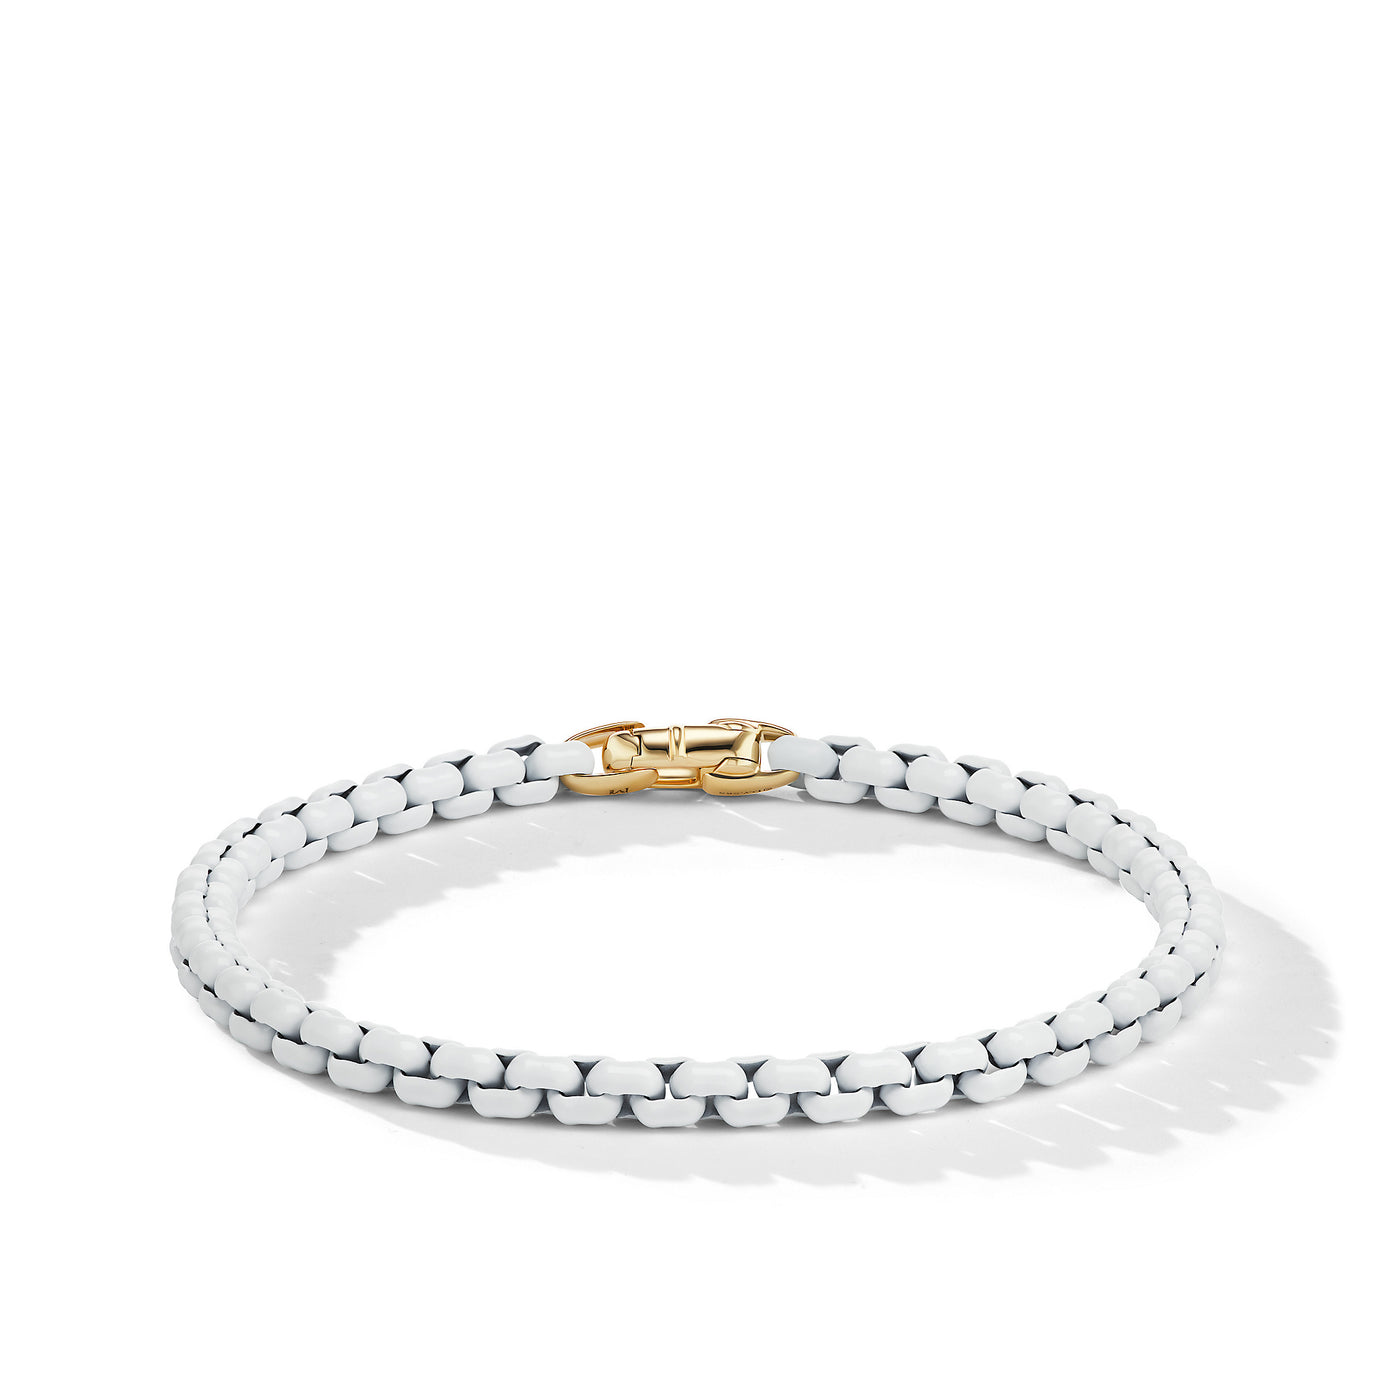 DY Bel Aire Color Box Chain Bracelet in White Acrylic with 14K Yellow Gold Accent\, 4mm